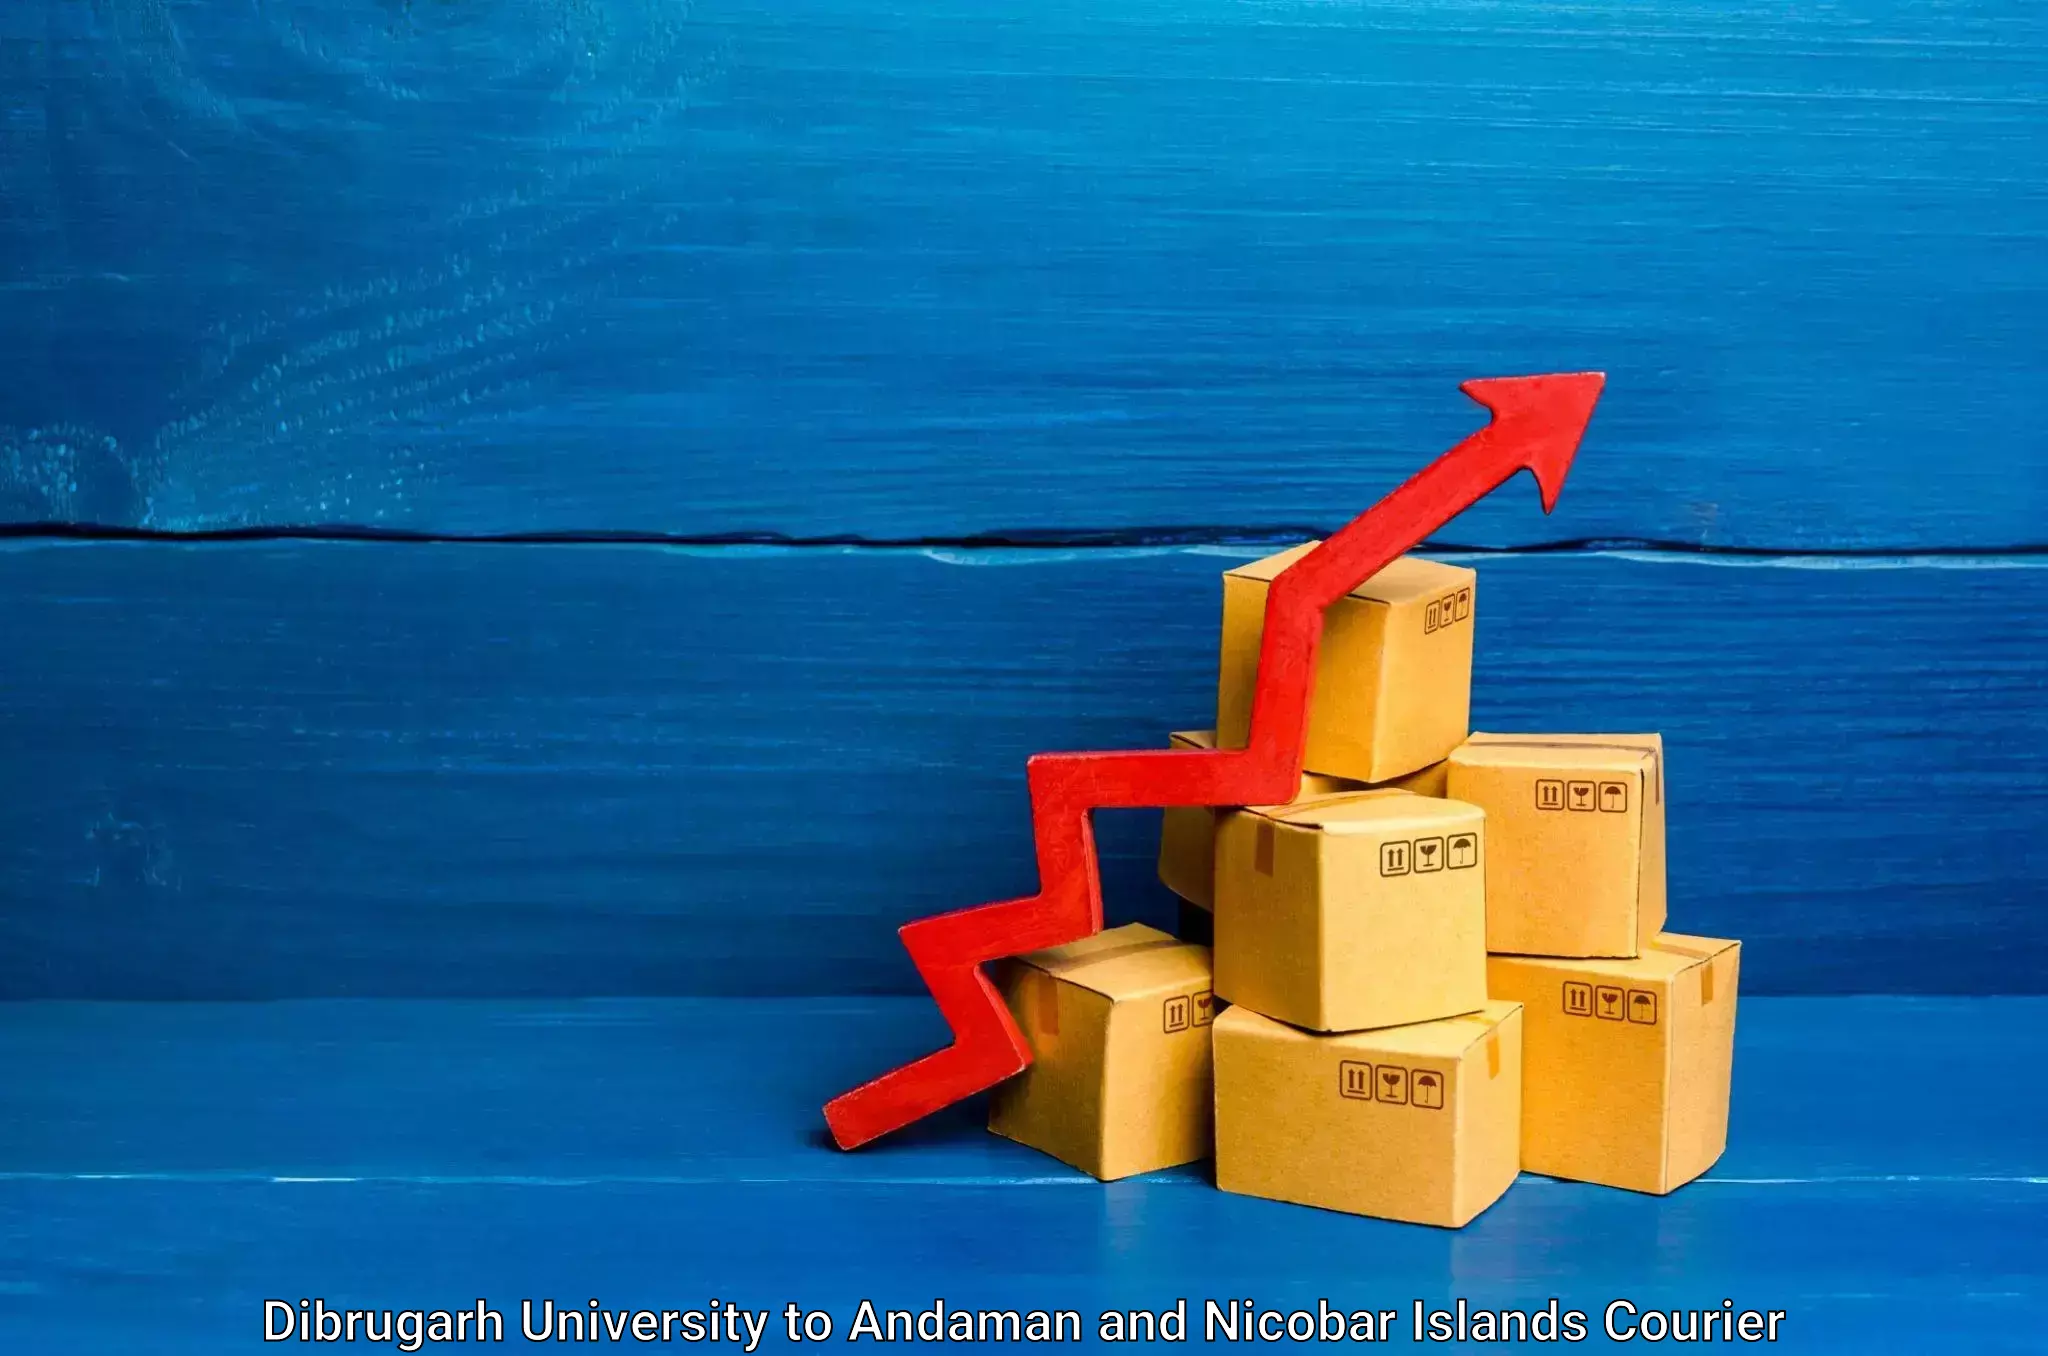 High-speed parcel service Dibrugarh University to South Andaman